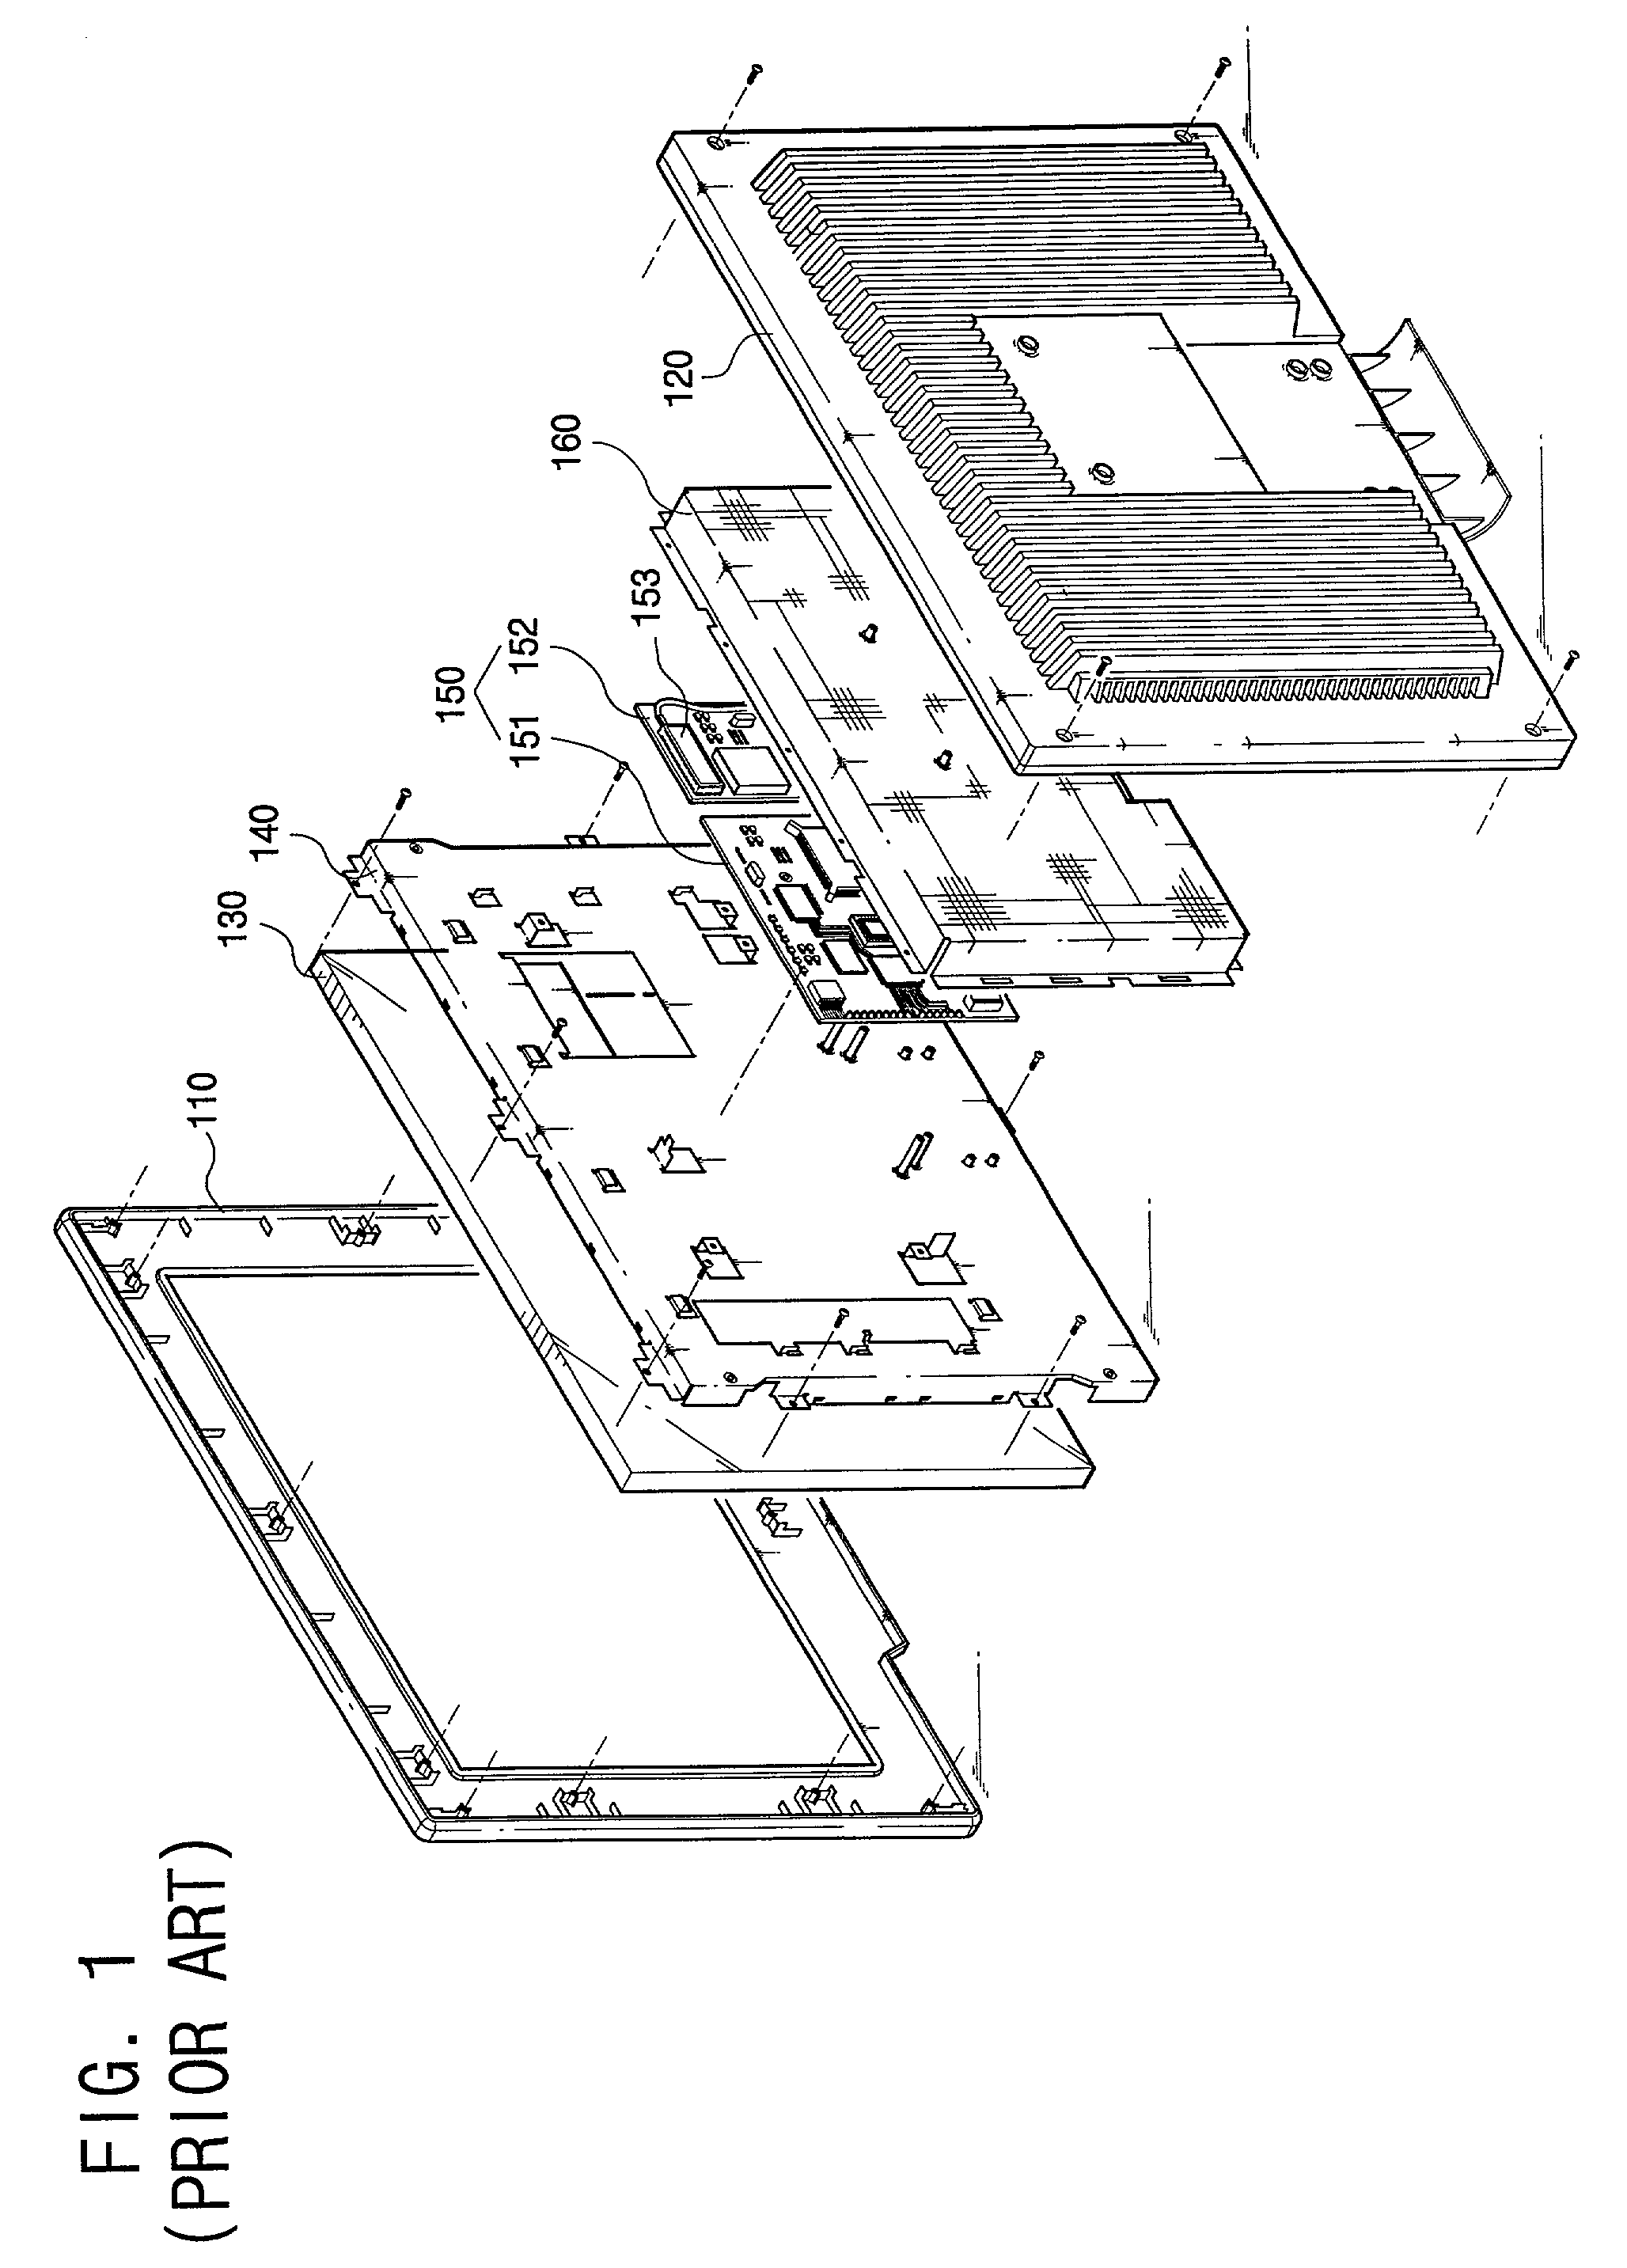 Display apparatus and a tuner mounted thereon